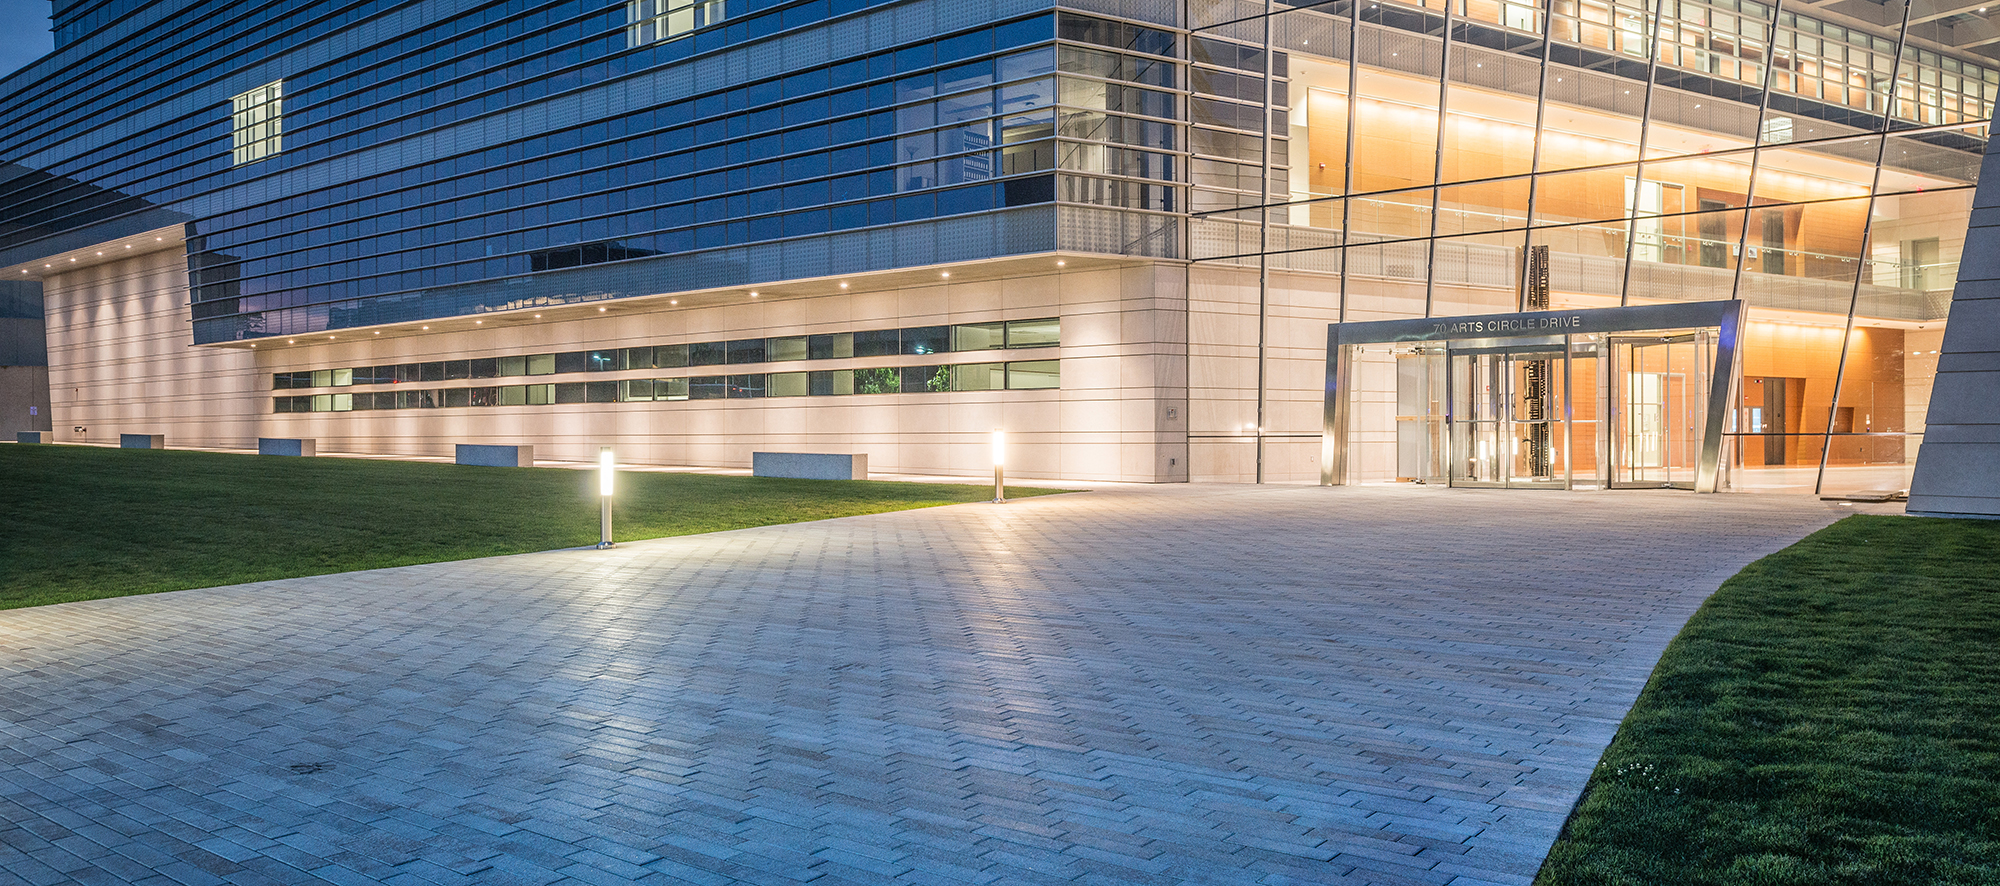 An entryway of a glass and steel building with outdoor lighting has grassy areas and a large path paved with Promenade plank.